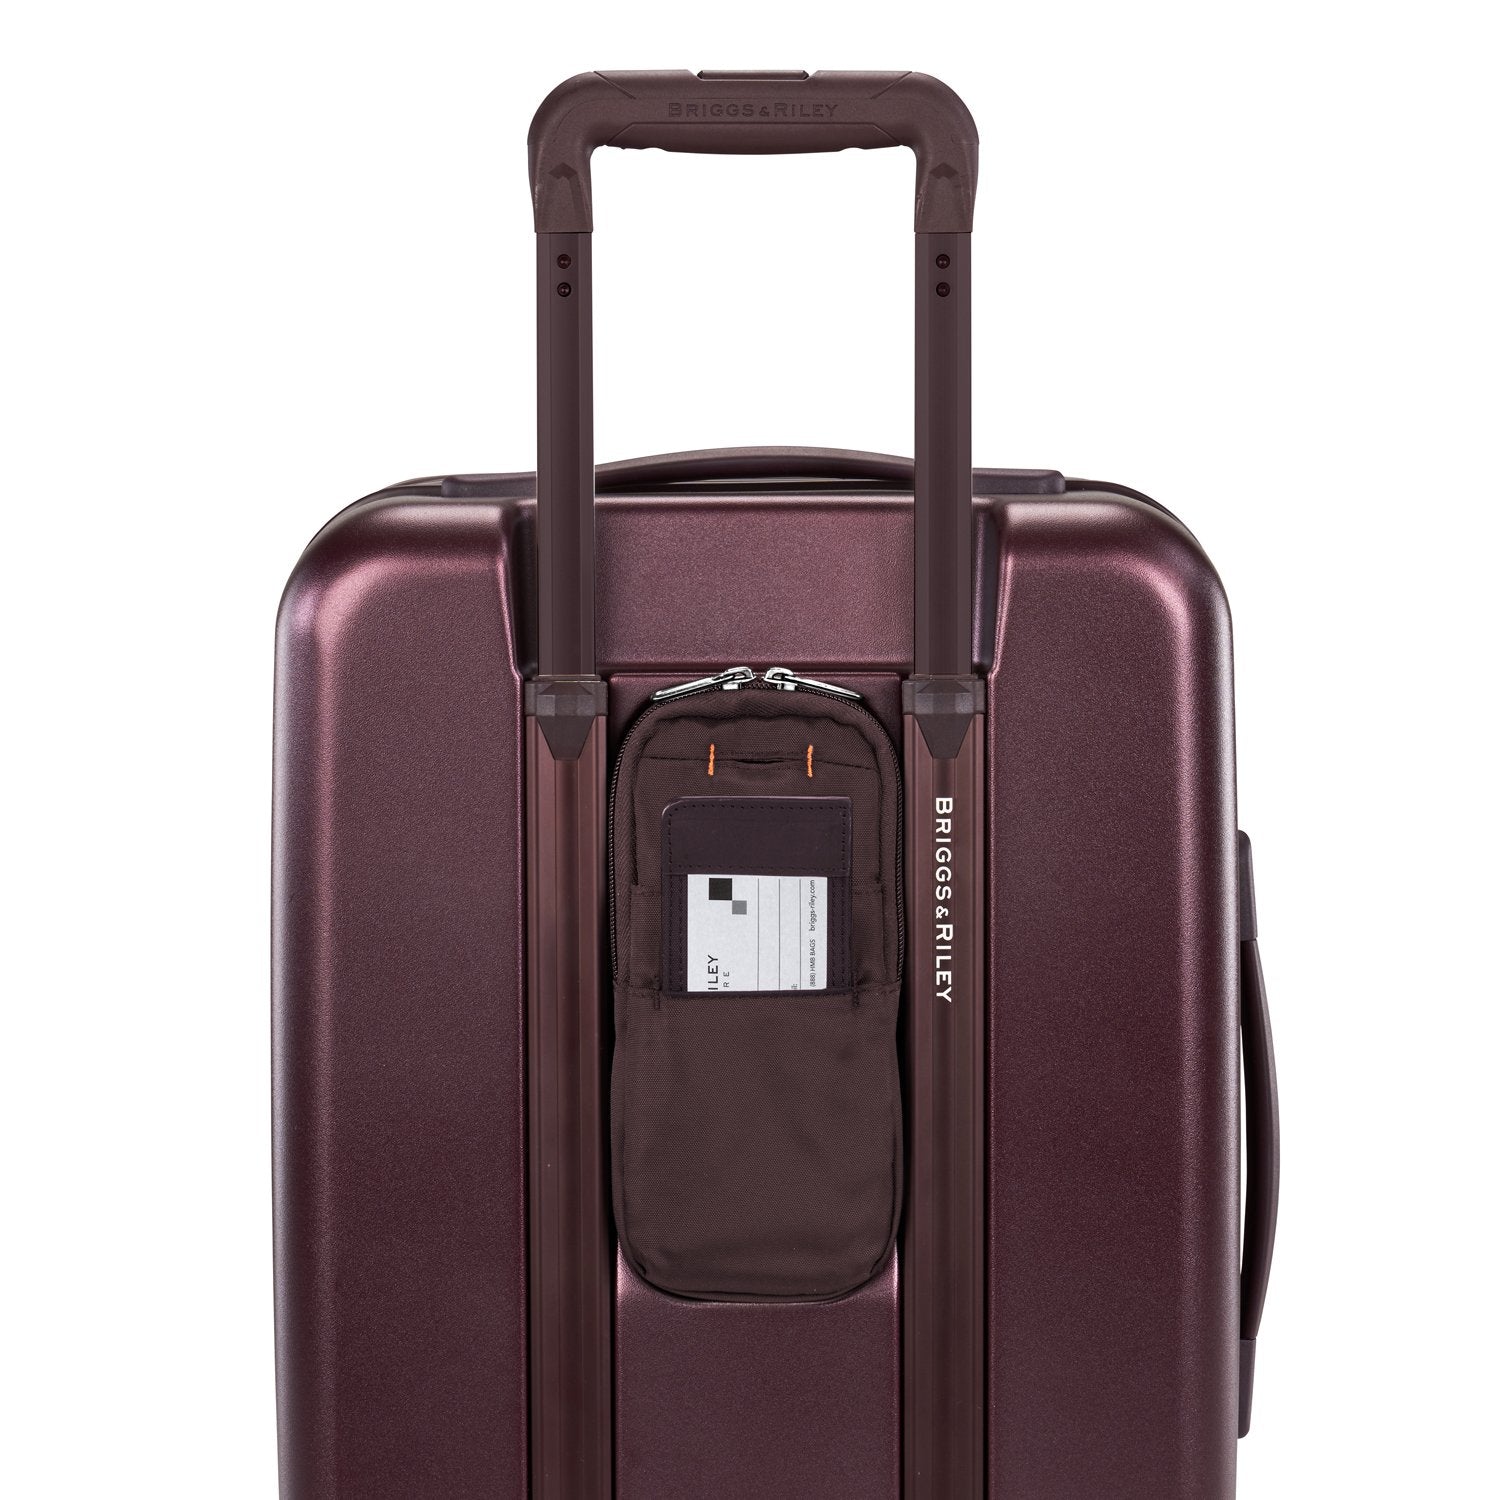 Briggs & Riley Sympatico 2.0 International Carry-On Expandable Spinner Plum